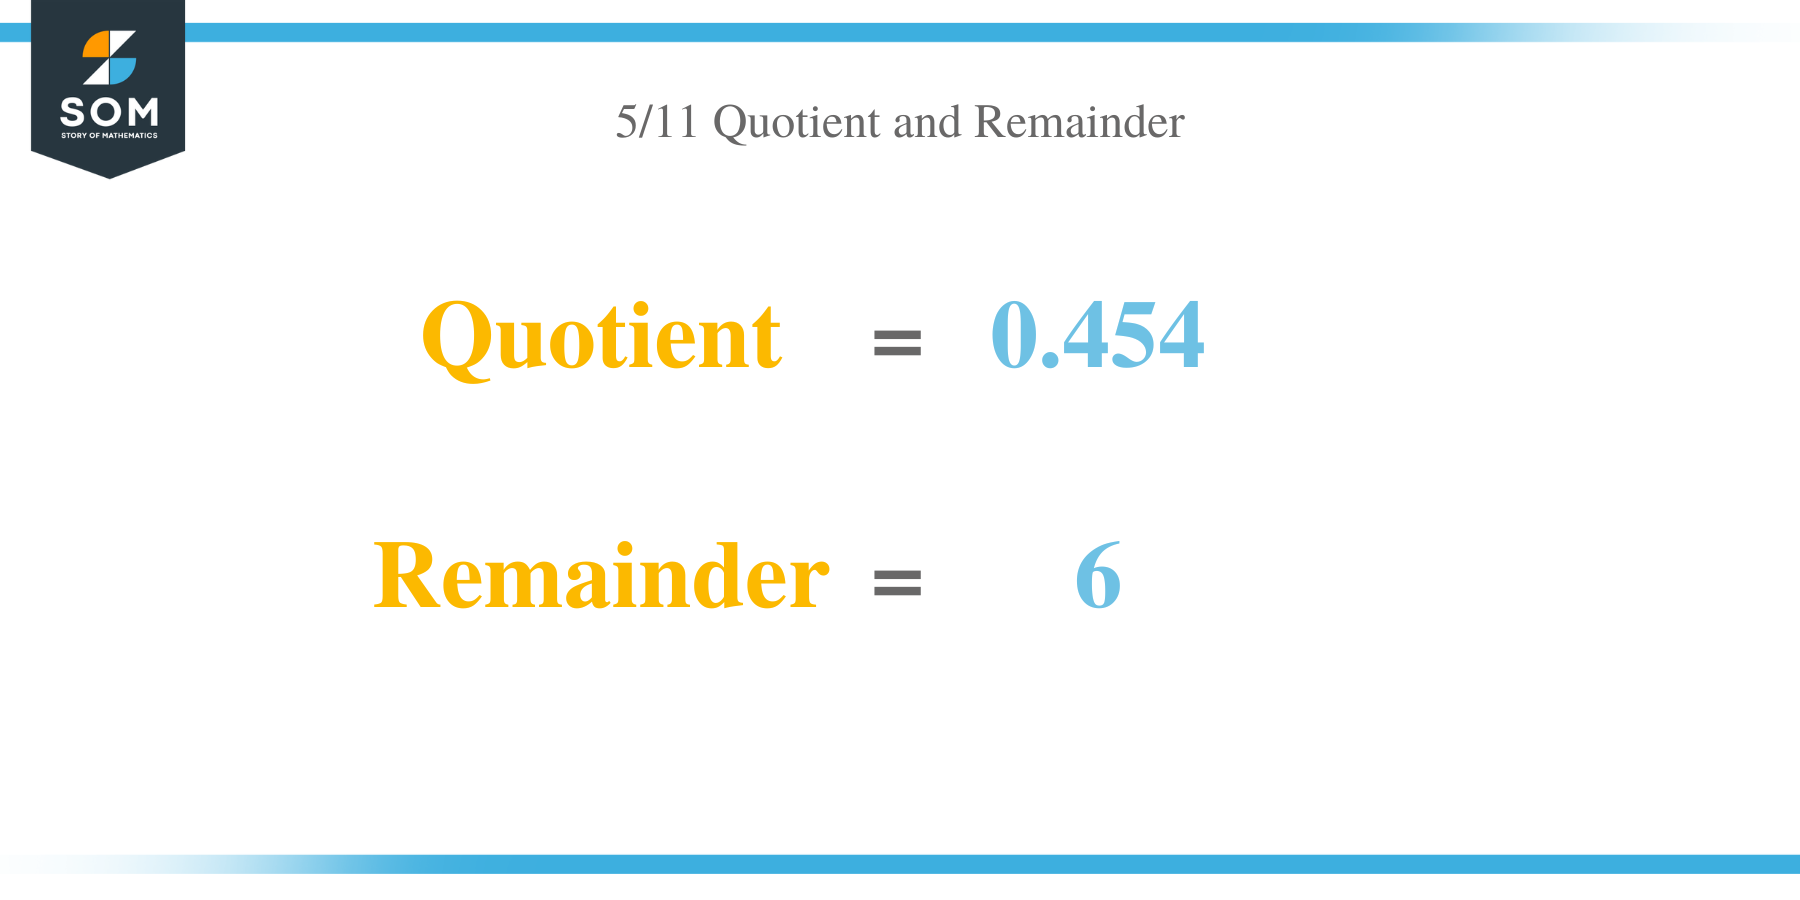 Quotient and Remainer of 5 per 11